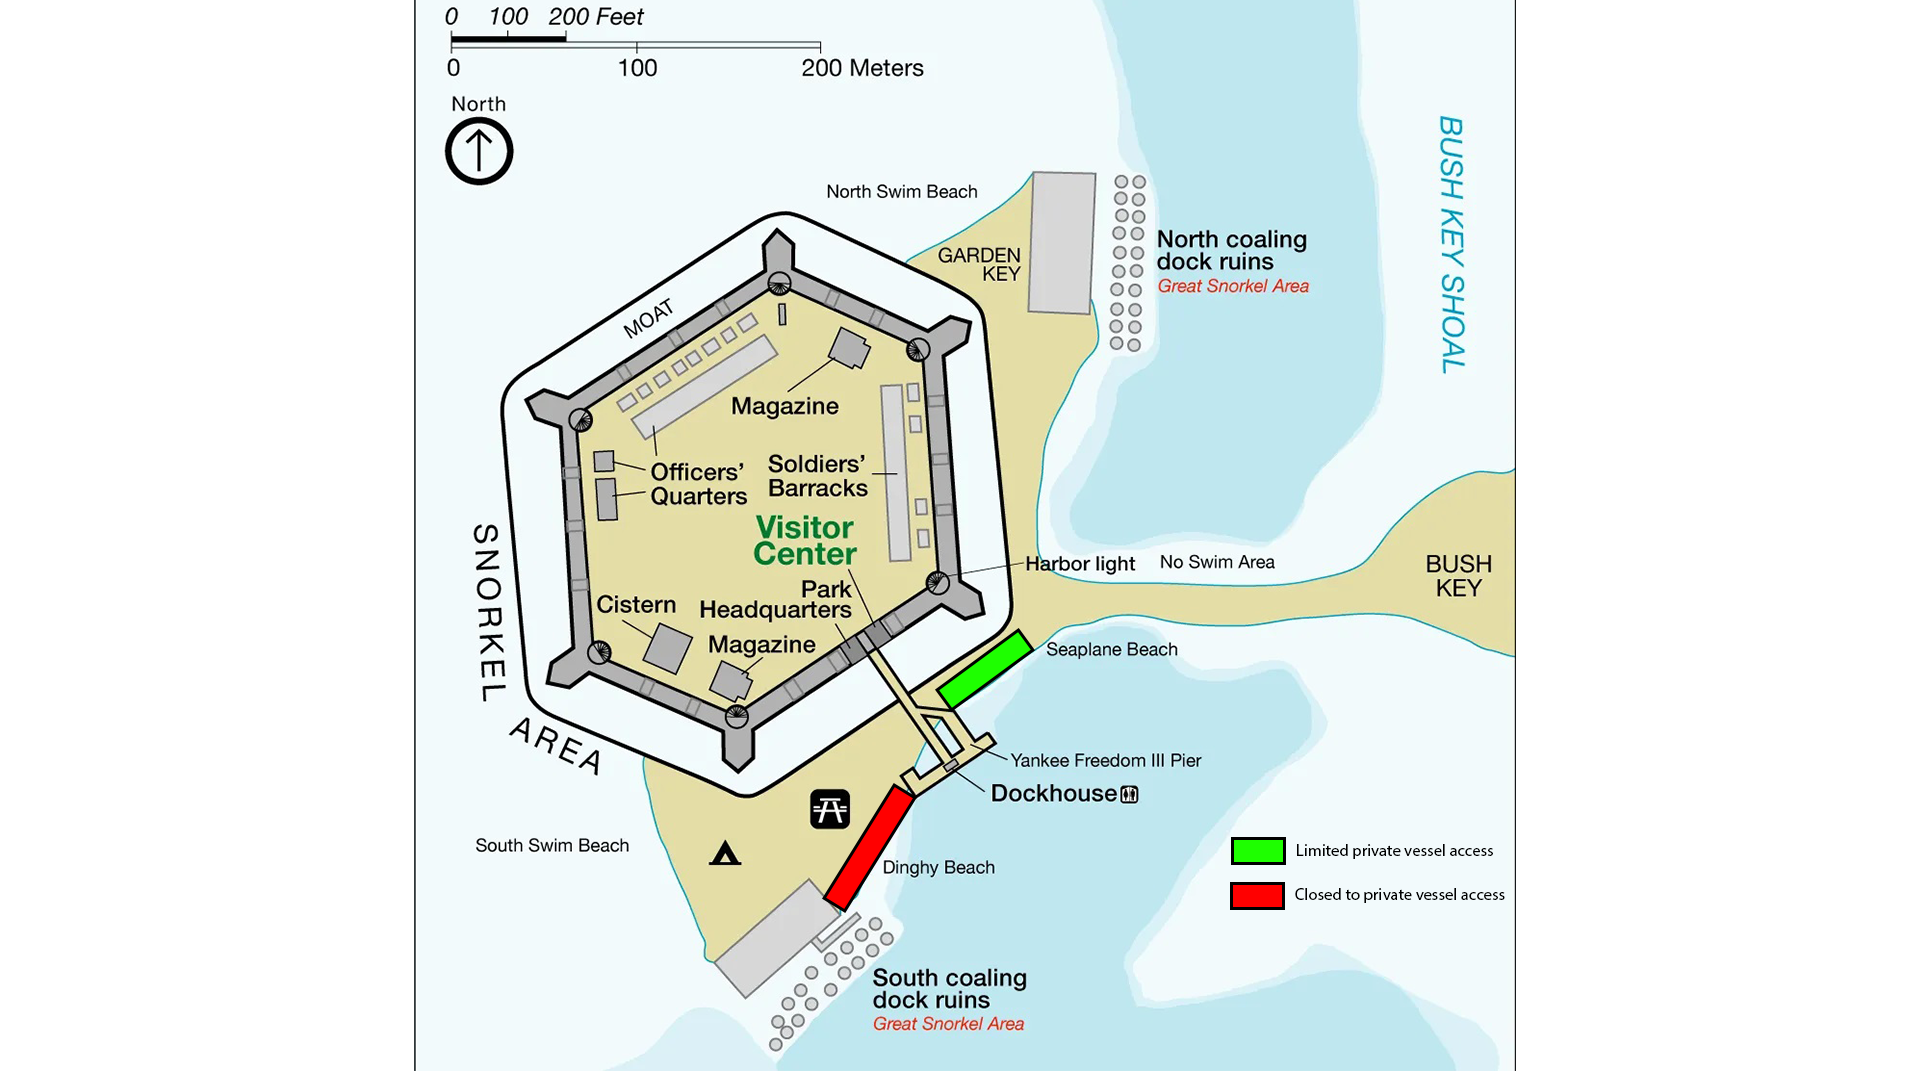 Map of Garden Key showing area closures